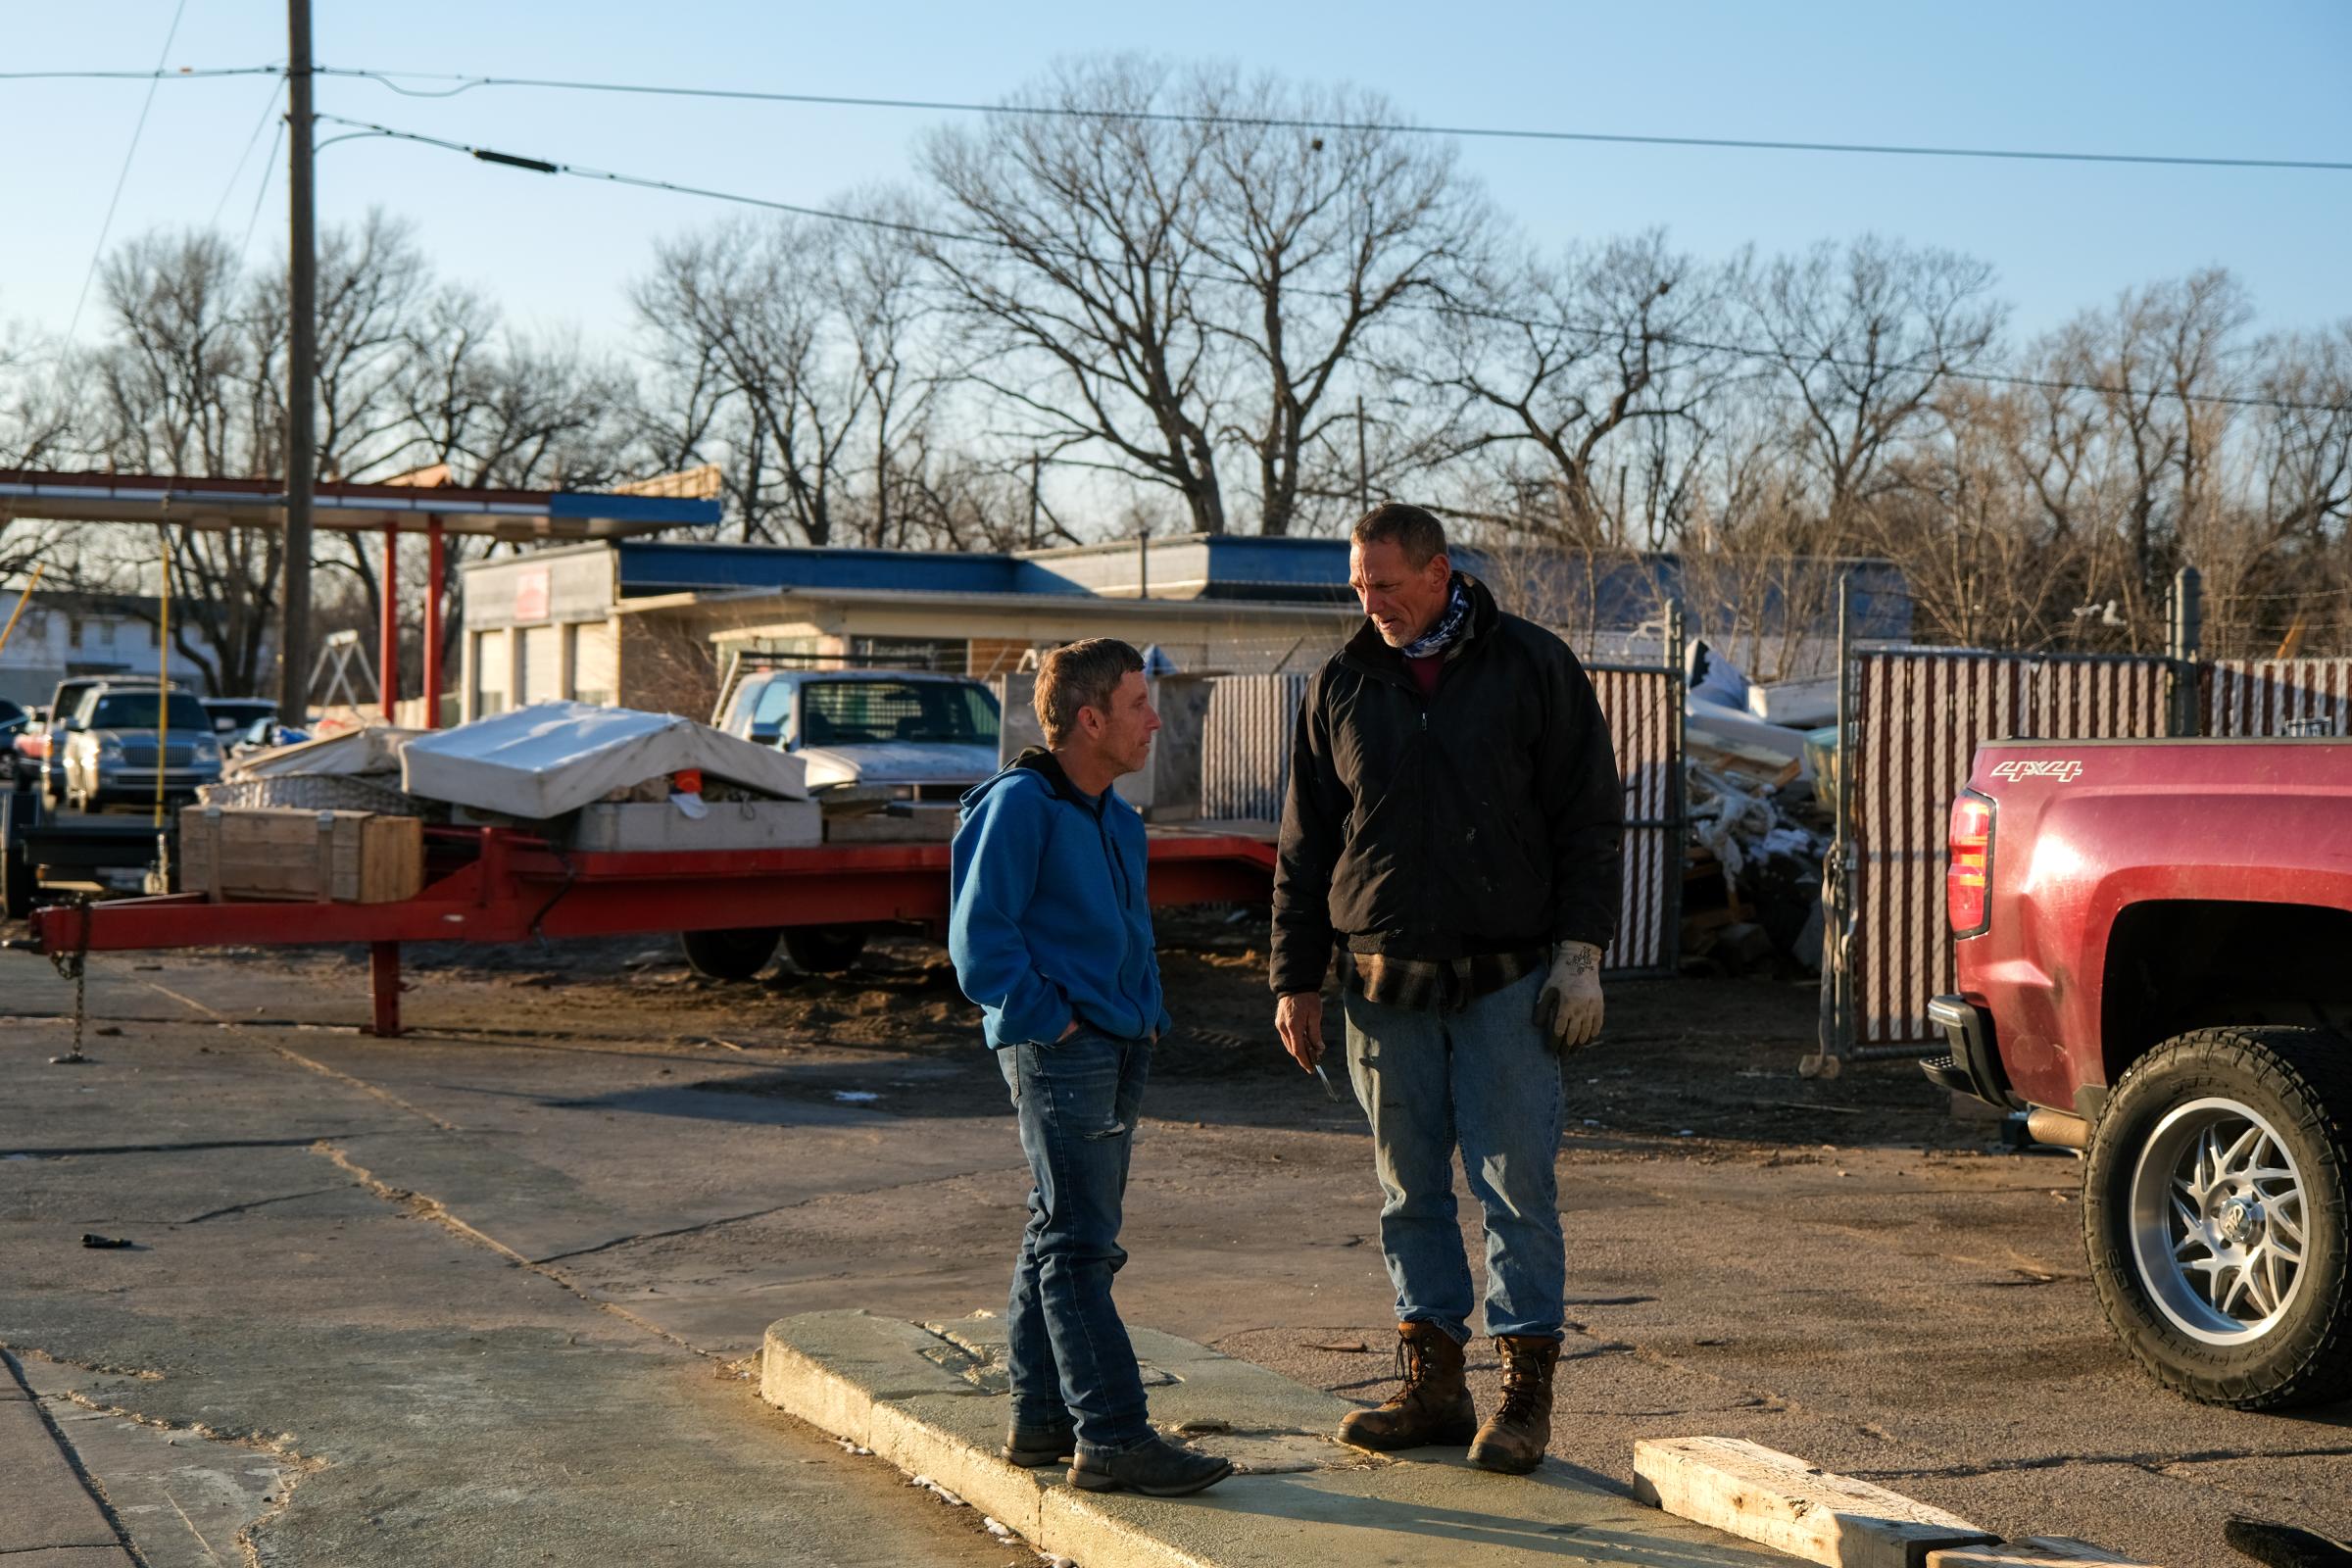 Floyd Bledsoe speaks with one of his employees, another formerly incarcerated man, at his mattress recycling facility in Hutchinson, Kansas, USA on January 15, 2022. Assignment code 20220115InnocentMan Hutchinson USA